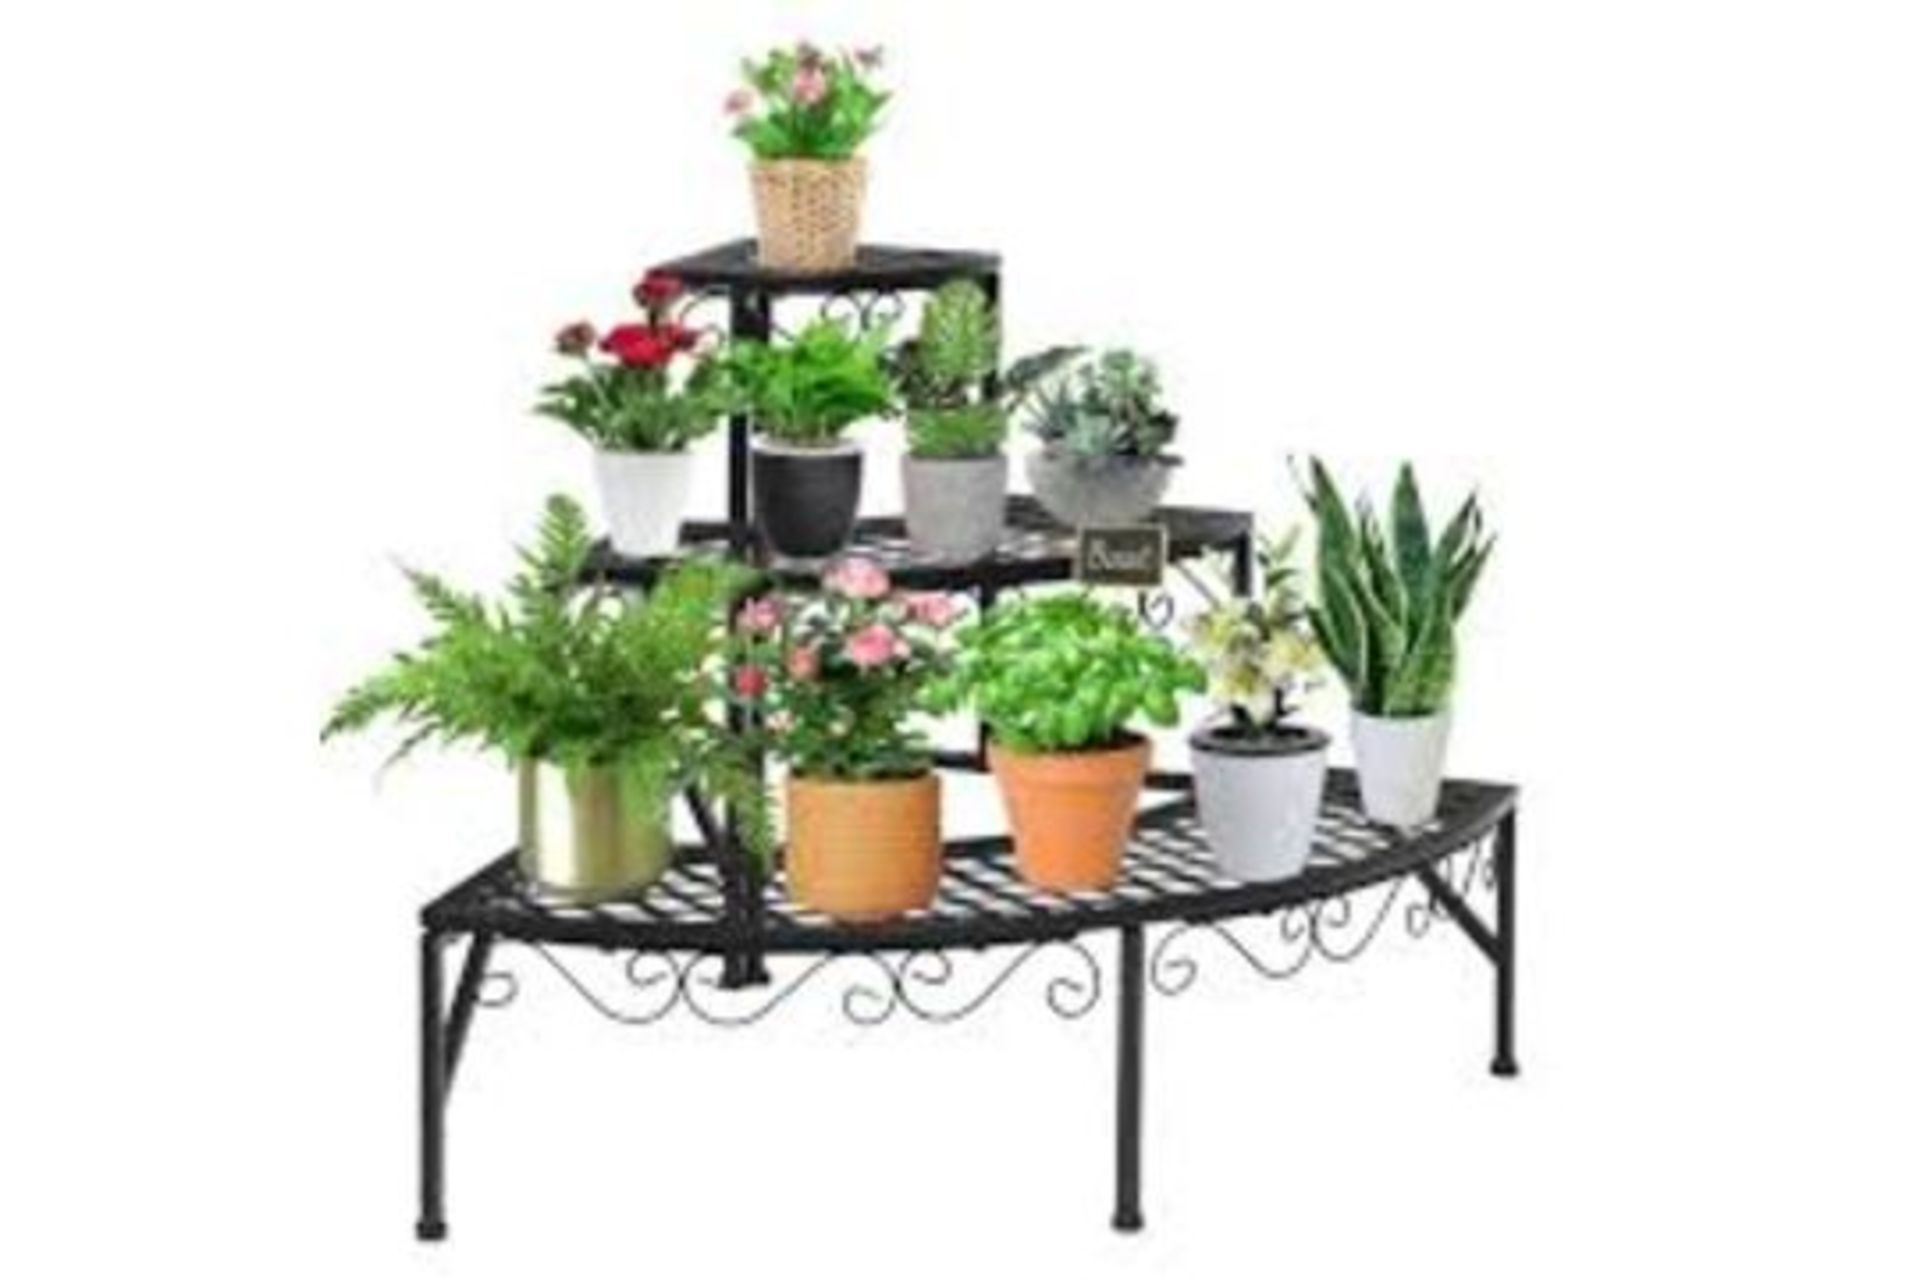 3-Tier Flower Stand. - R14.15. Are you bothered by the lack of display space for your plants? This